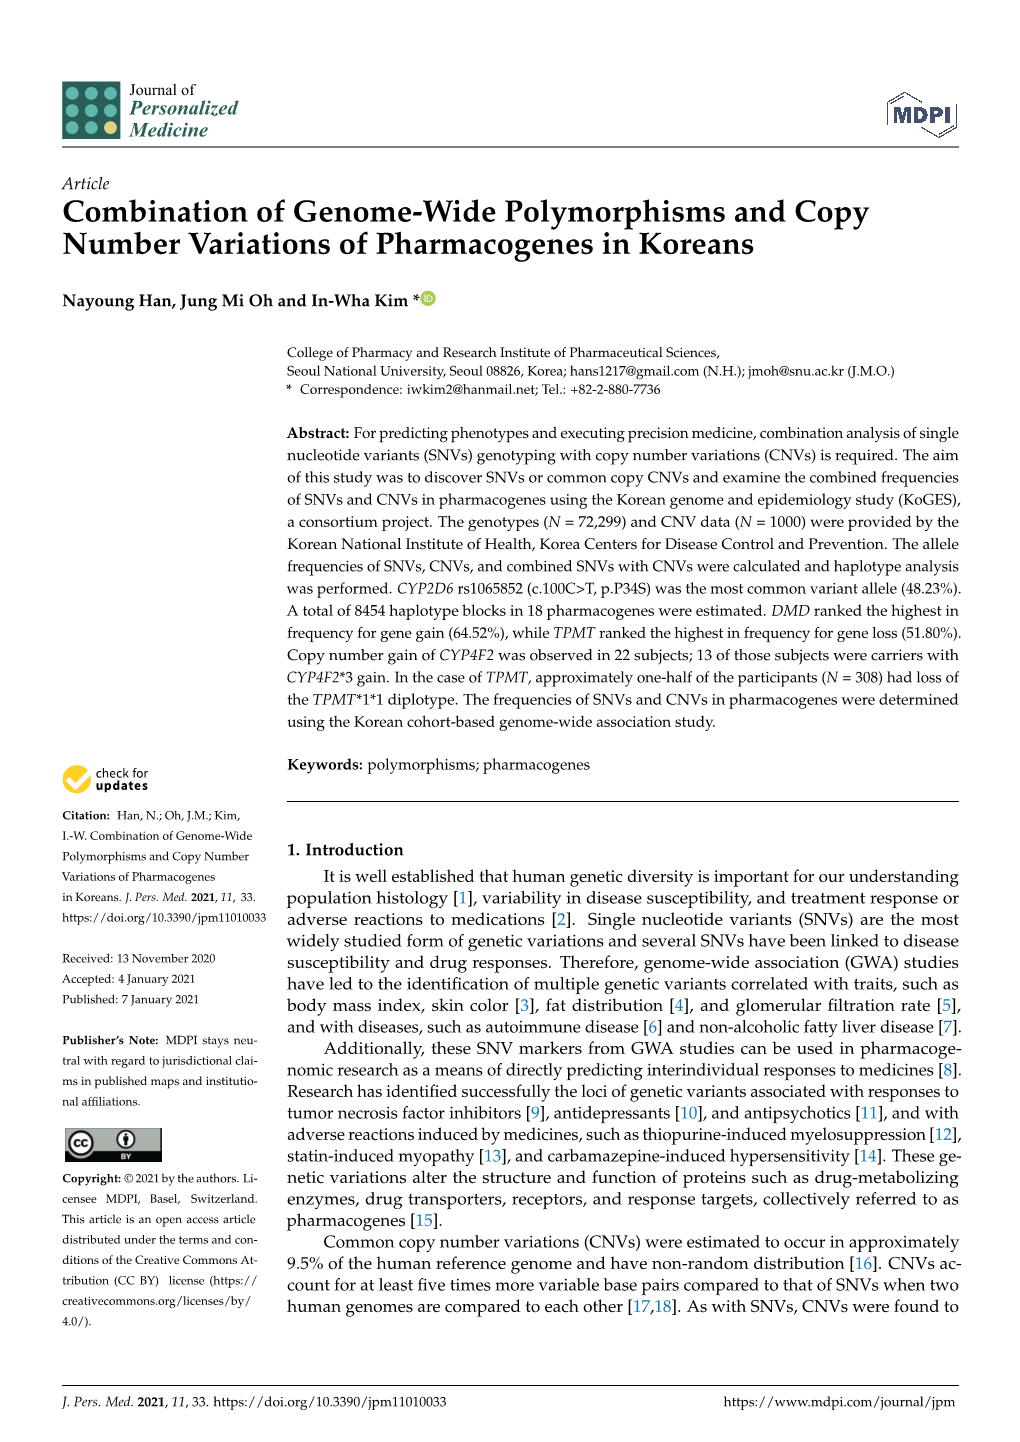 Combination of Genome-Wide Polymorphisms and Copy Number Variations of Pharmacogenes in Koreans